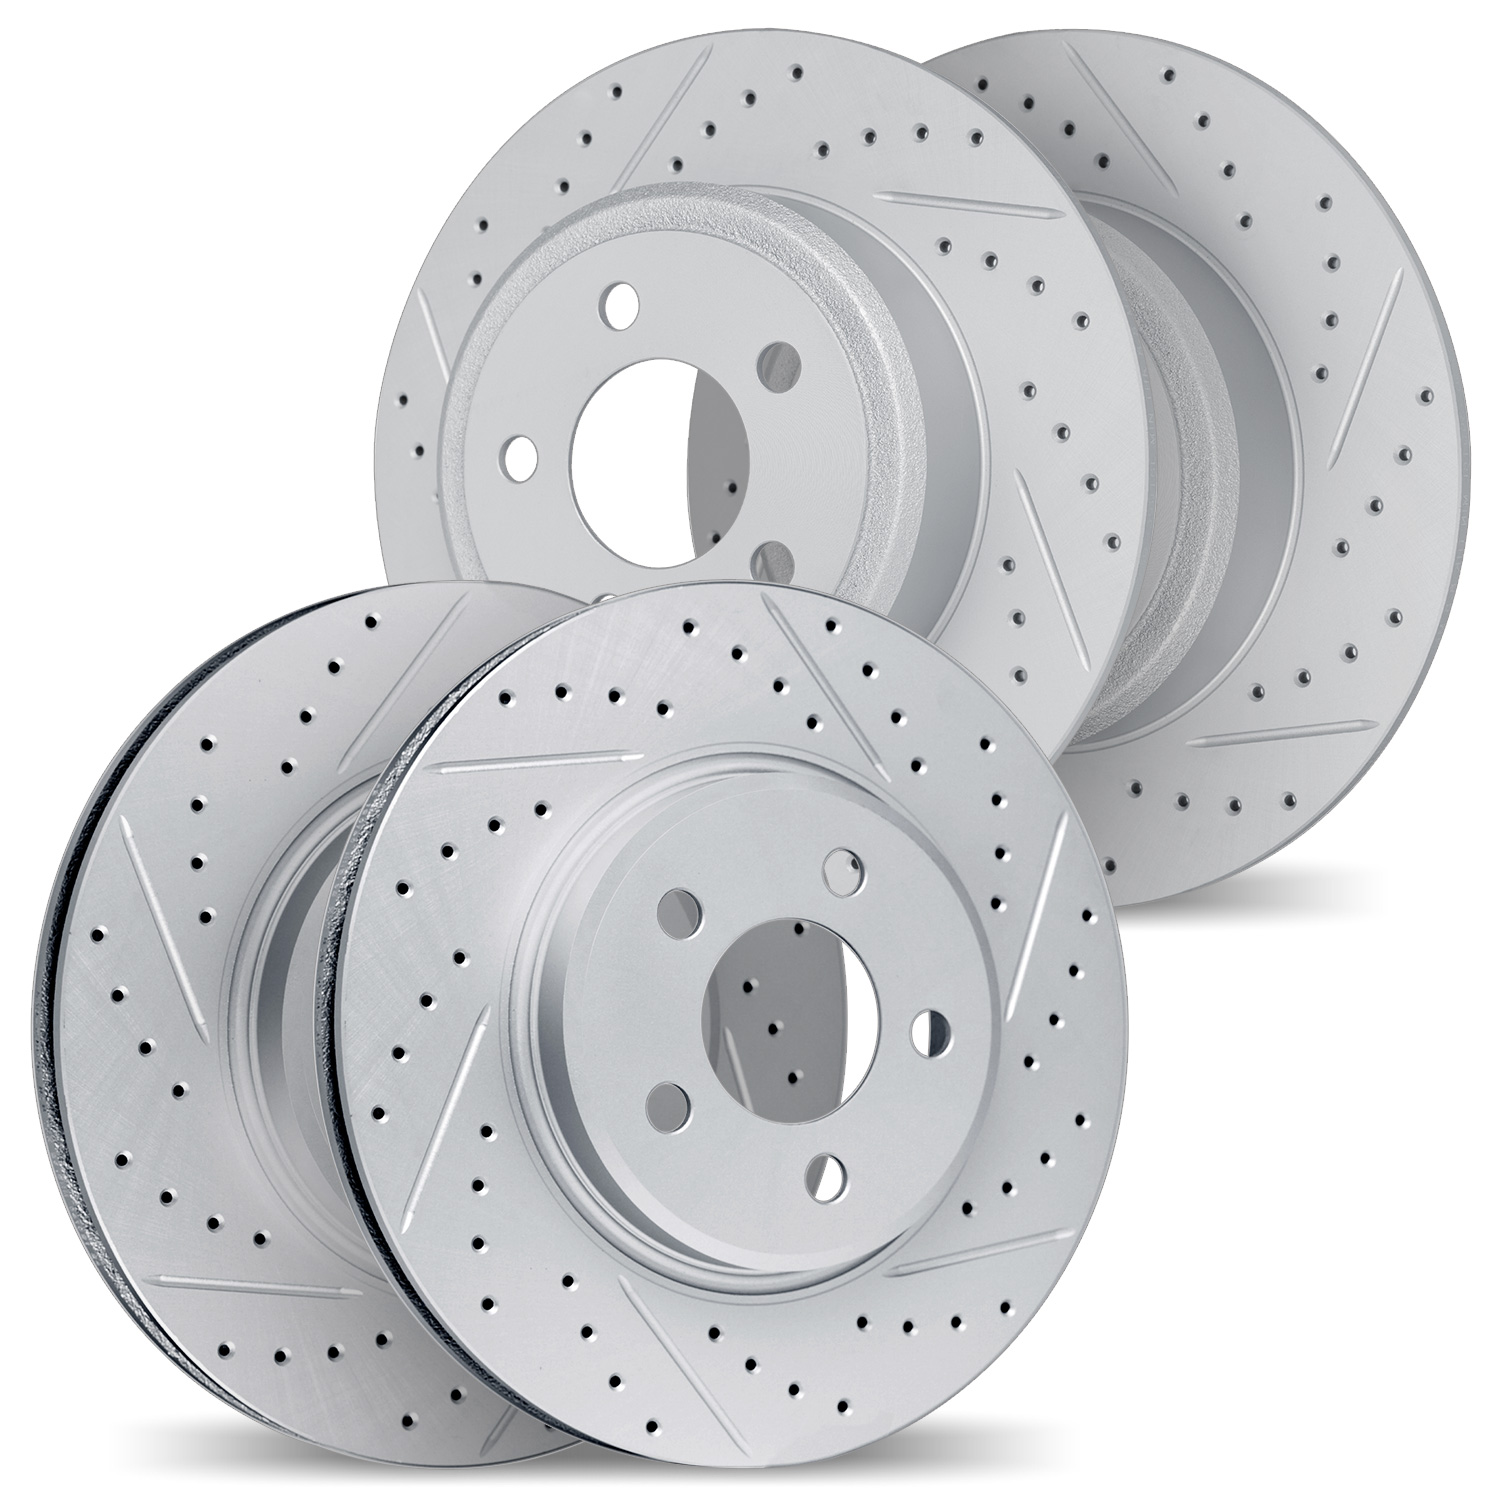 2004-39009 Geoperformance Drilled/Slotted Brake Rotors, 1995-2006 Mopar, Position: Front and Rear